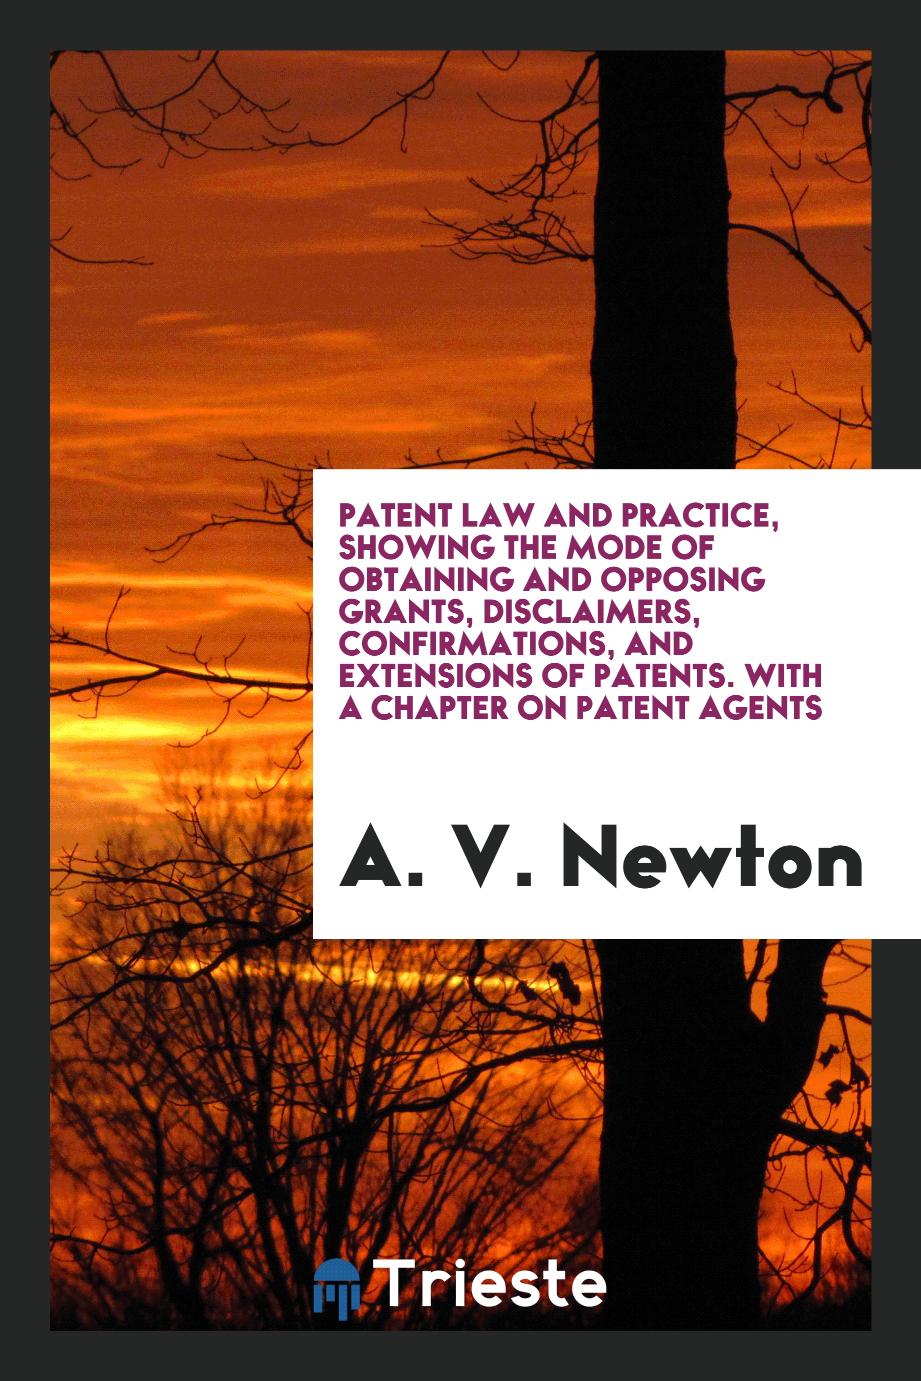 Patent Law and Practice, Showing the Mode of Obtaining and Opposing Grants, Disclaimers, Confirmations, and Extensions of Patents. With a Chapter on Patent Agents